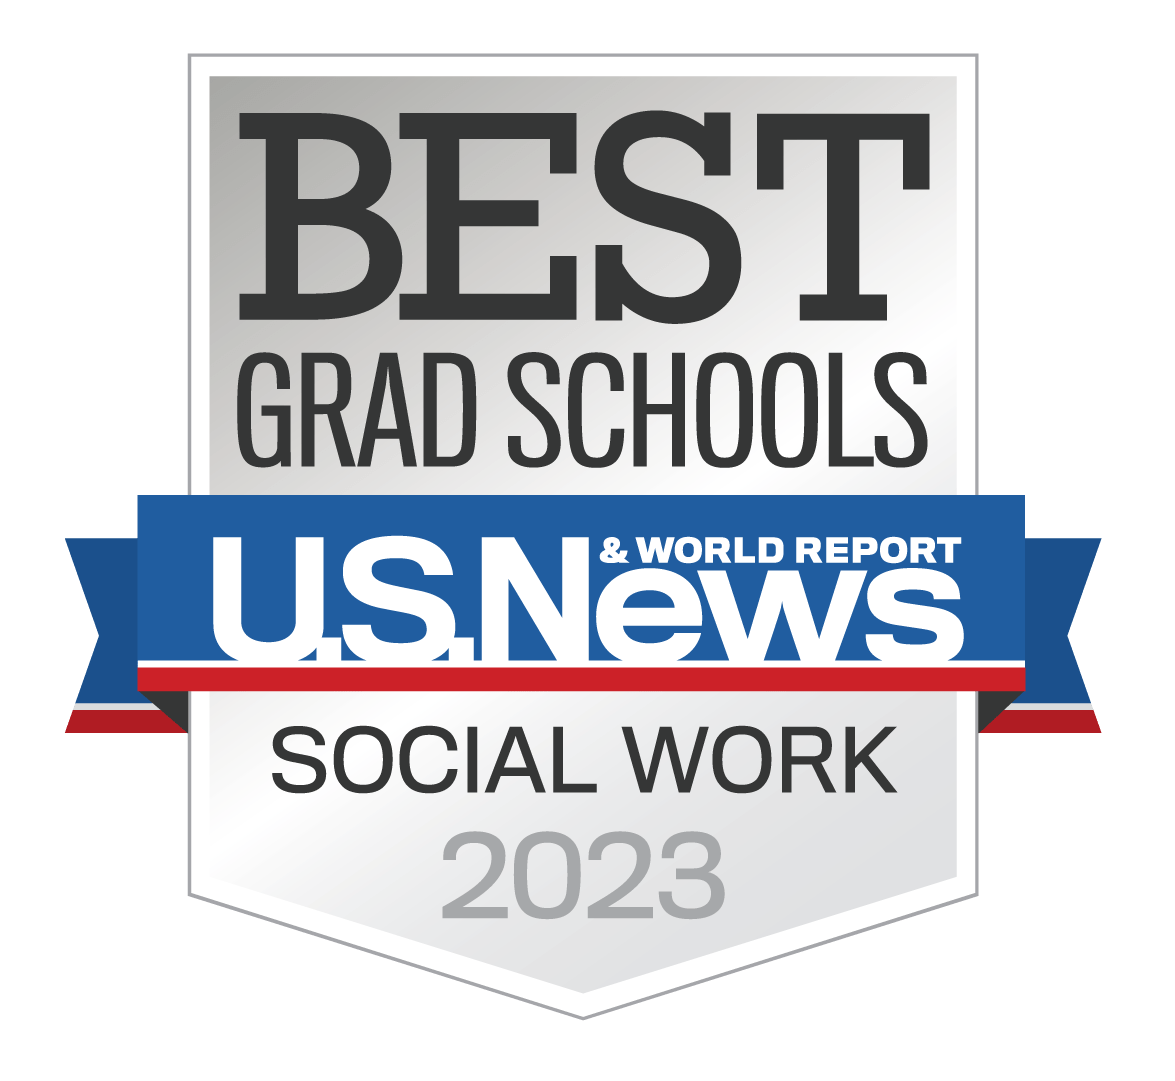 What Degree Do Social Workers Have